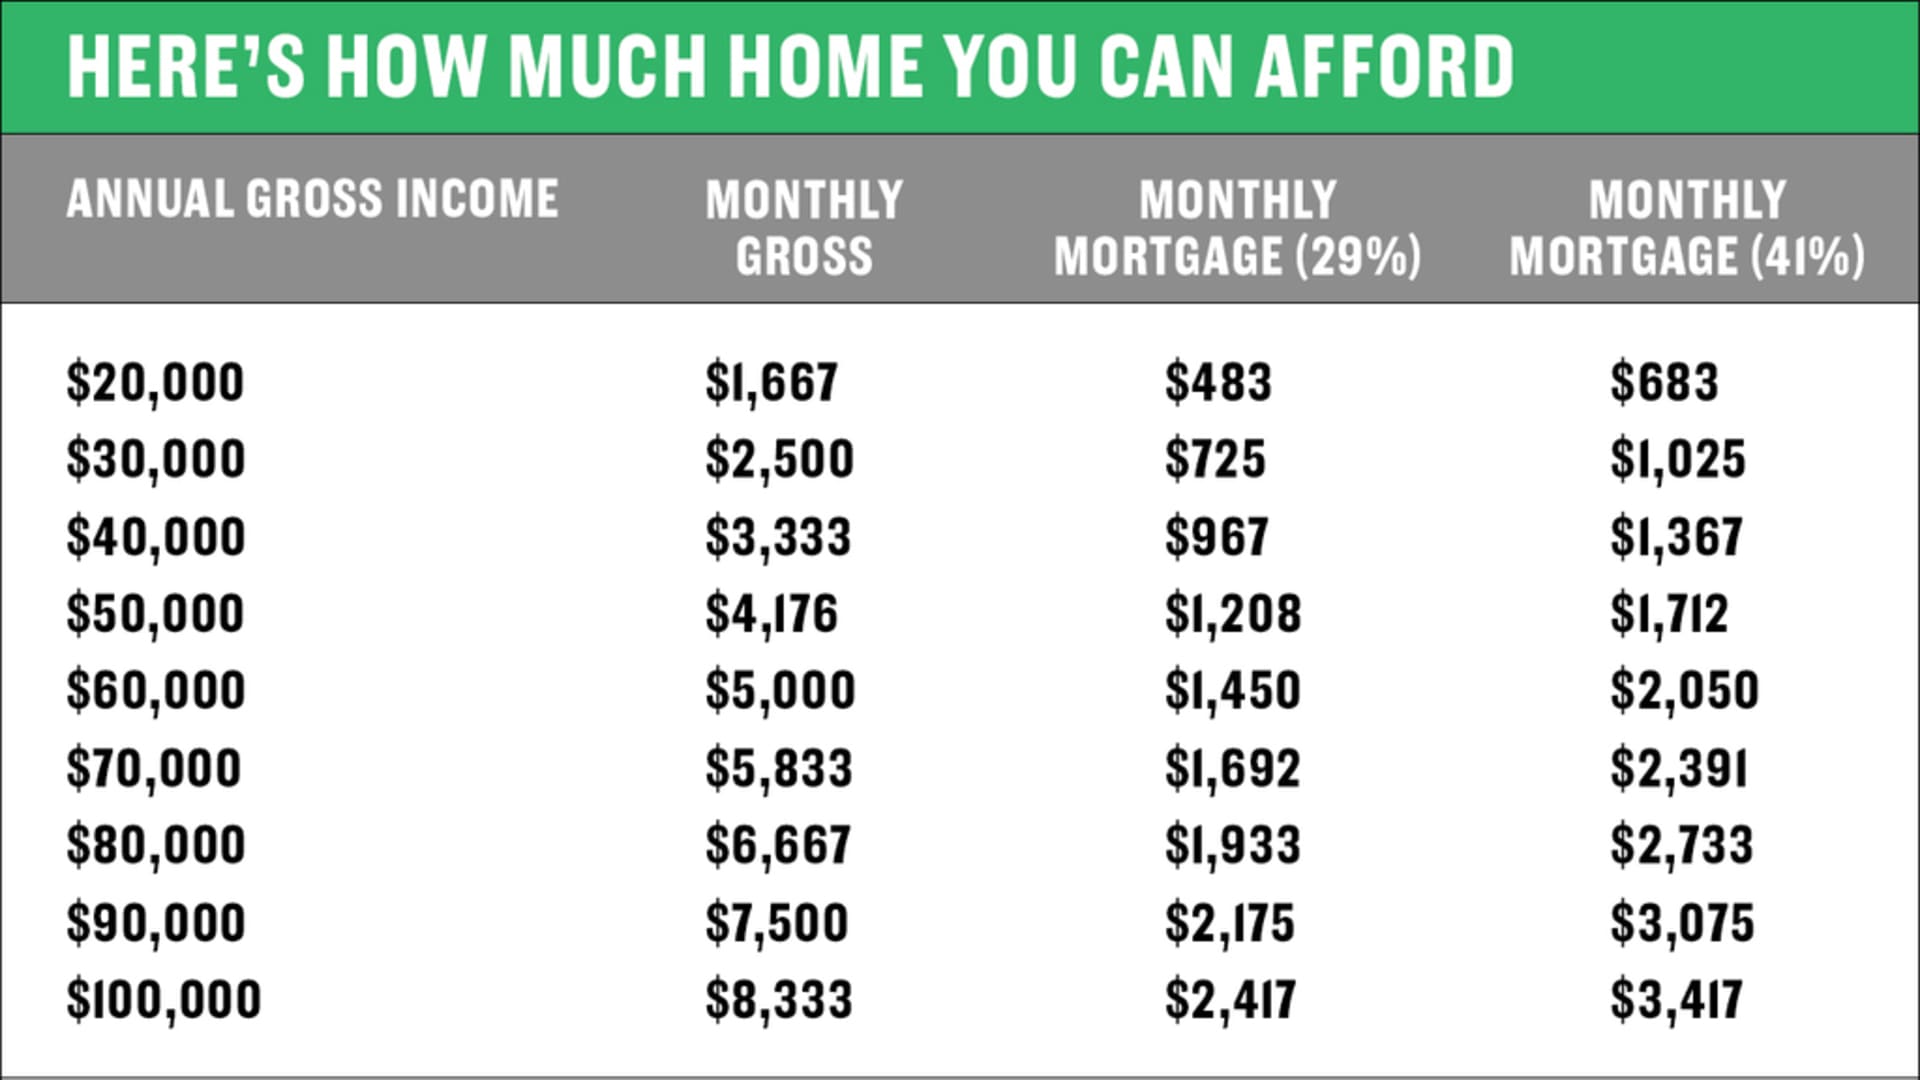 Here's how to figure out how much home you can afford